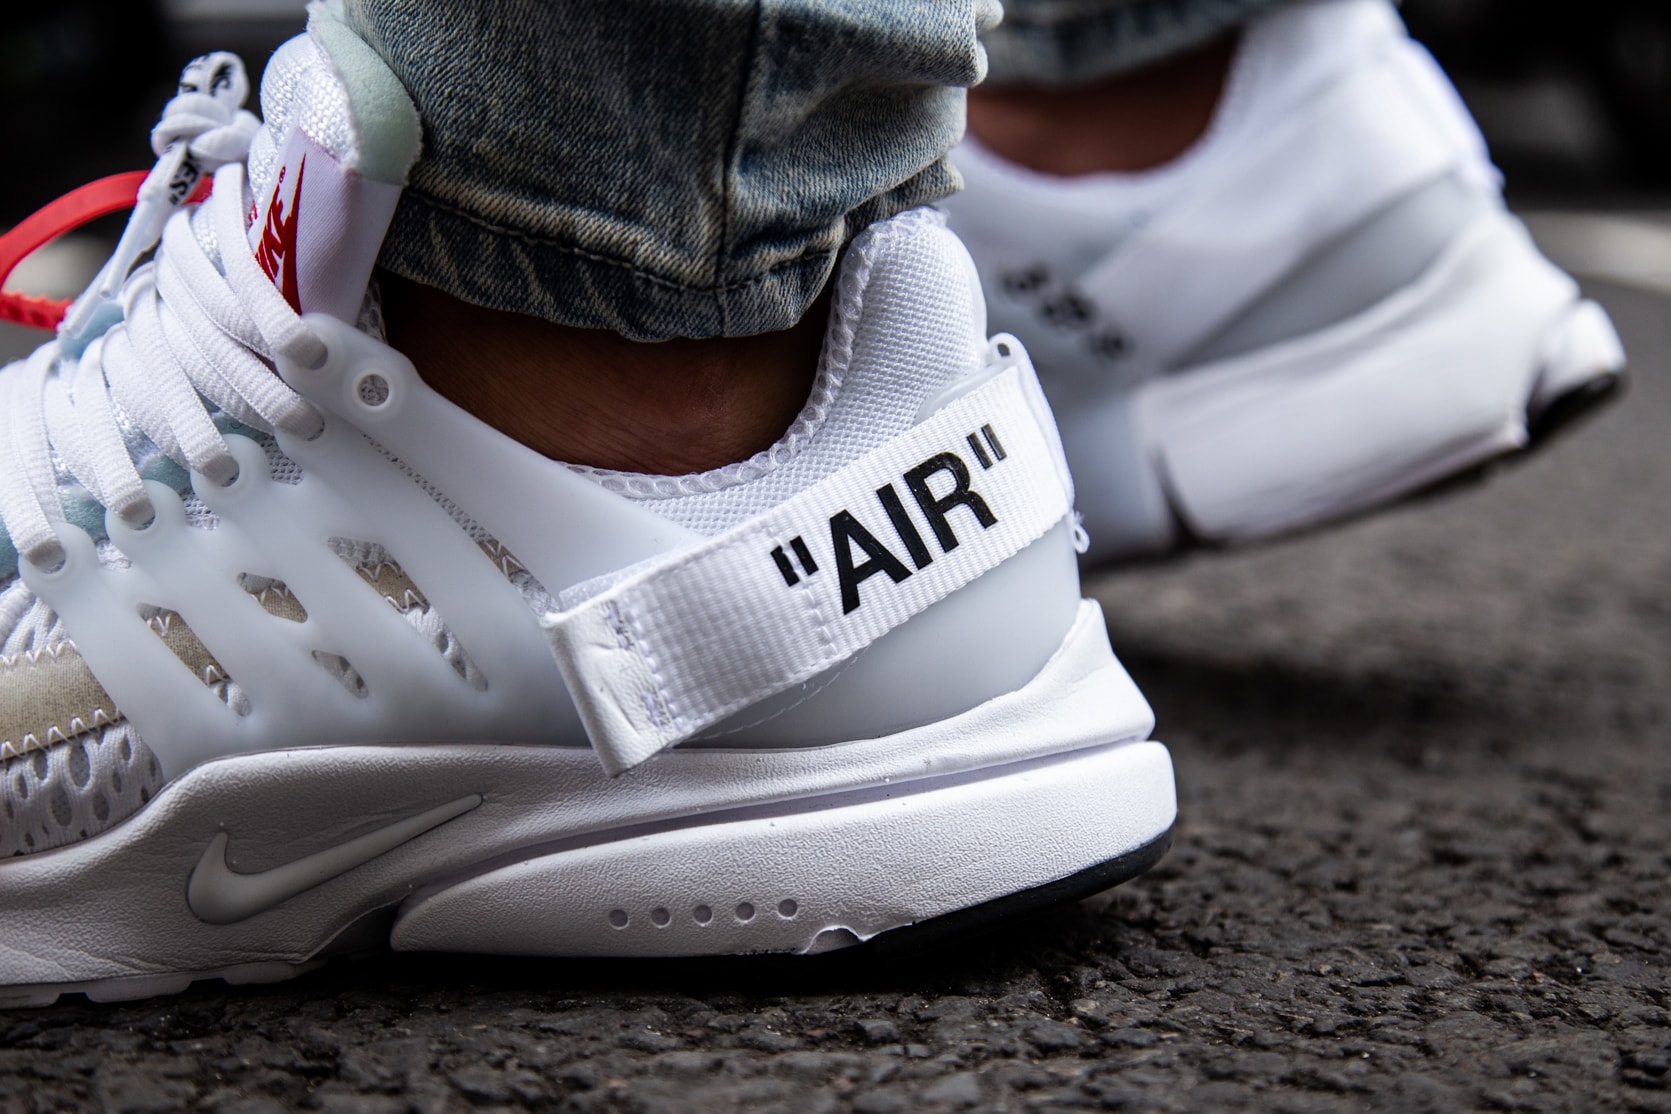 Virgil Abloh x Nike Air Presto White On-Foot June 21 2018 Release Date Info Drop Unreleased Kicks Trainers Shoes Sneakers Footwear Off-White Off White Coming Soon Purchase Buy Cop